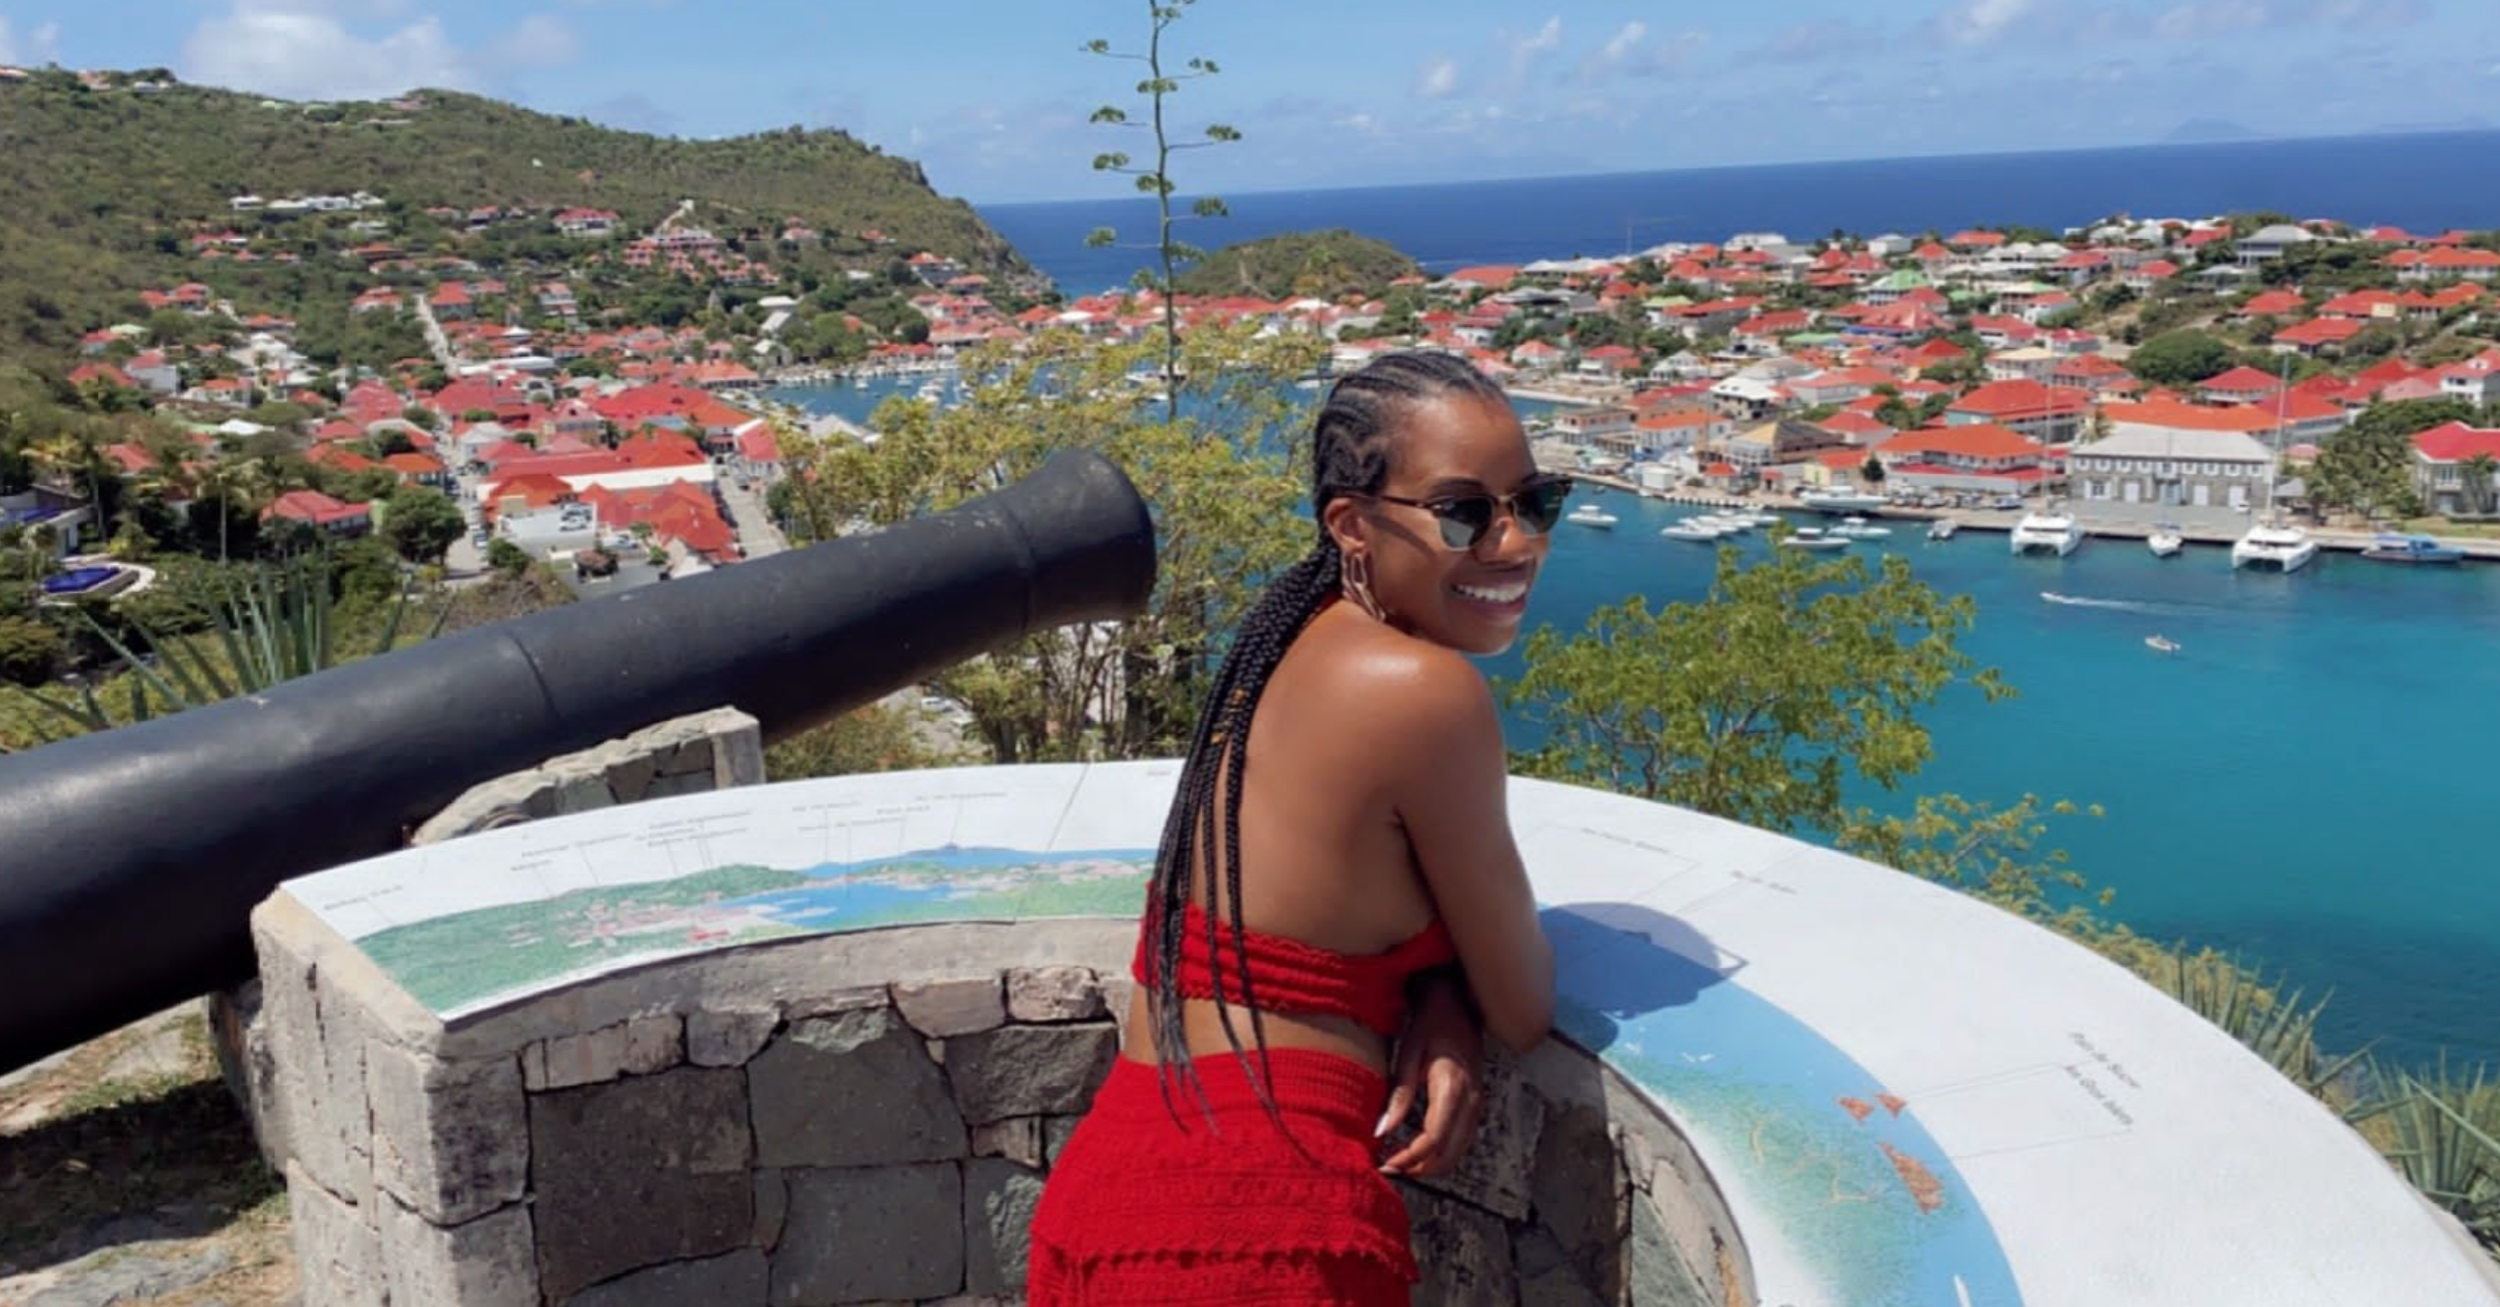 How to Spend a Day in St. Barths - The Wanderlust Effect